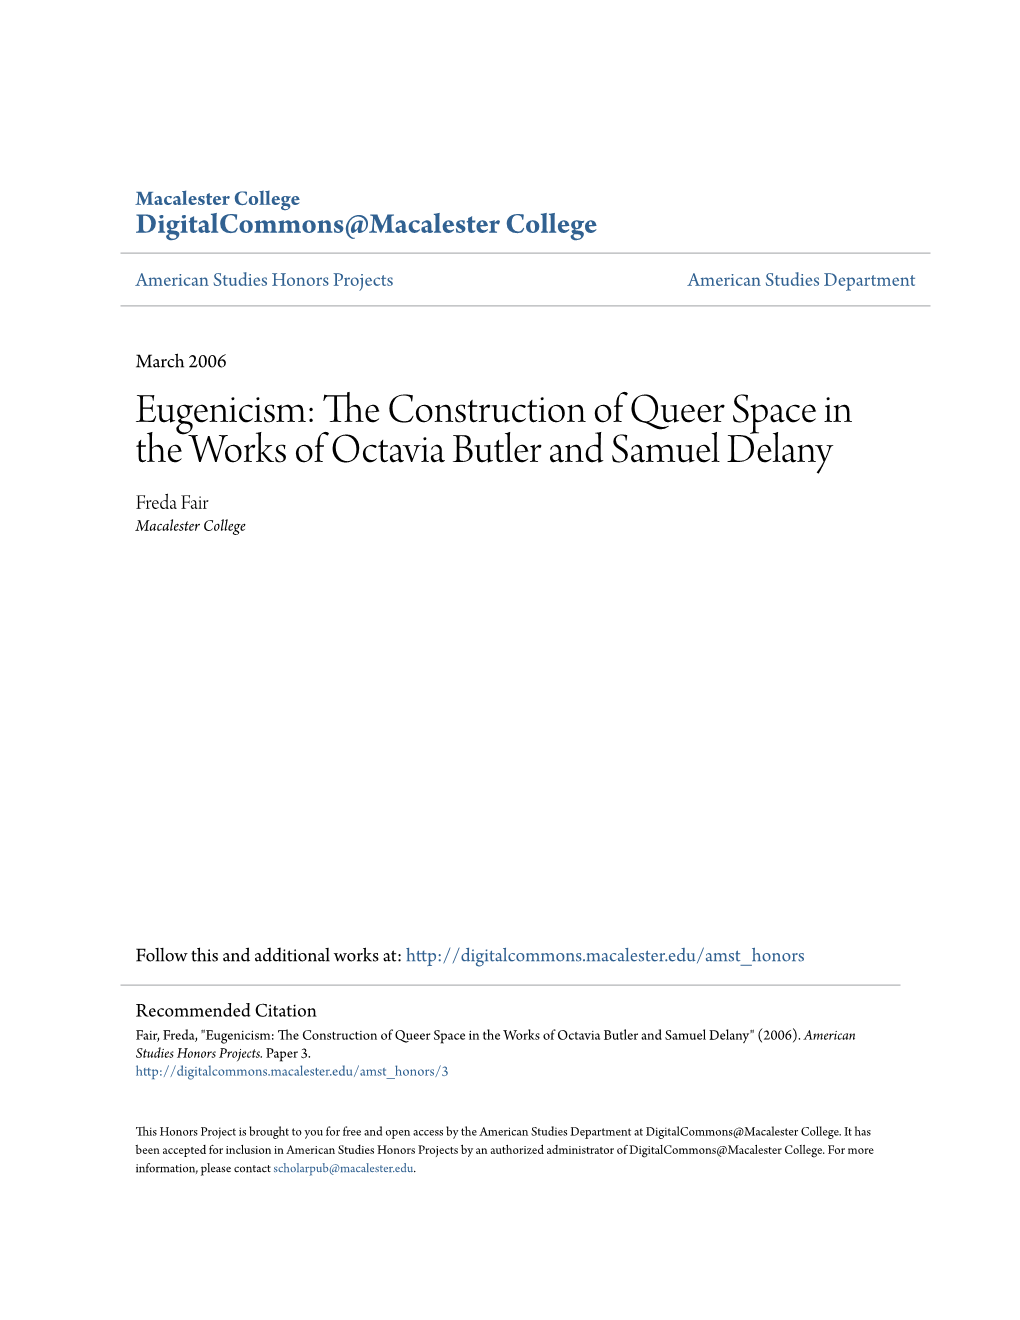 The Construction of Queer Space in the Works of Octavia Butler and Samuel Delany